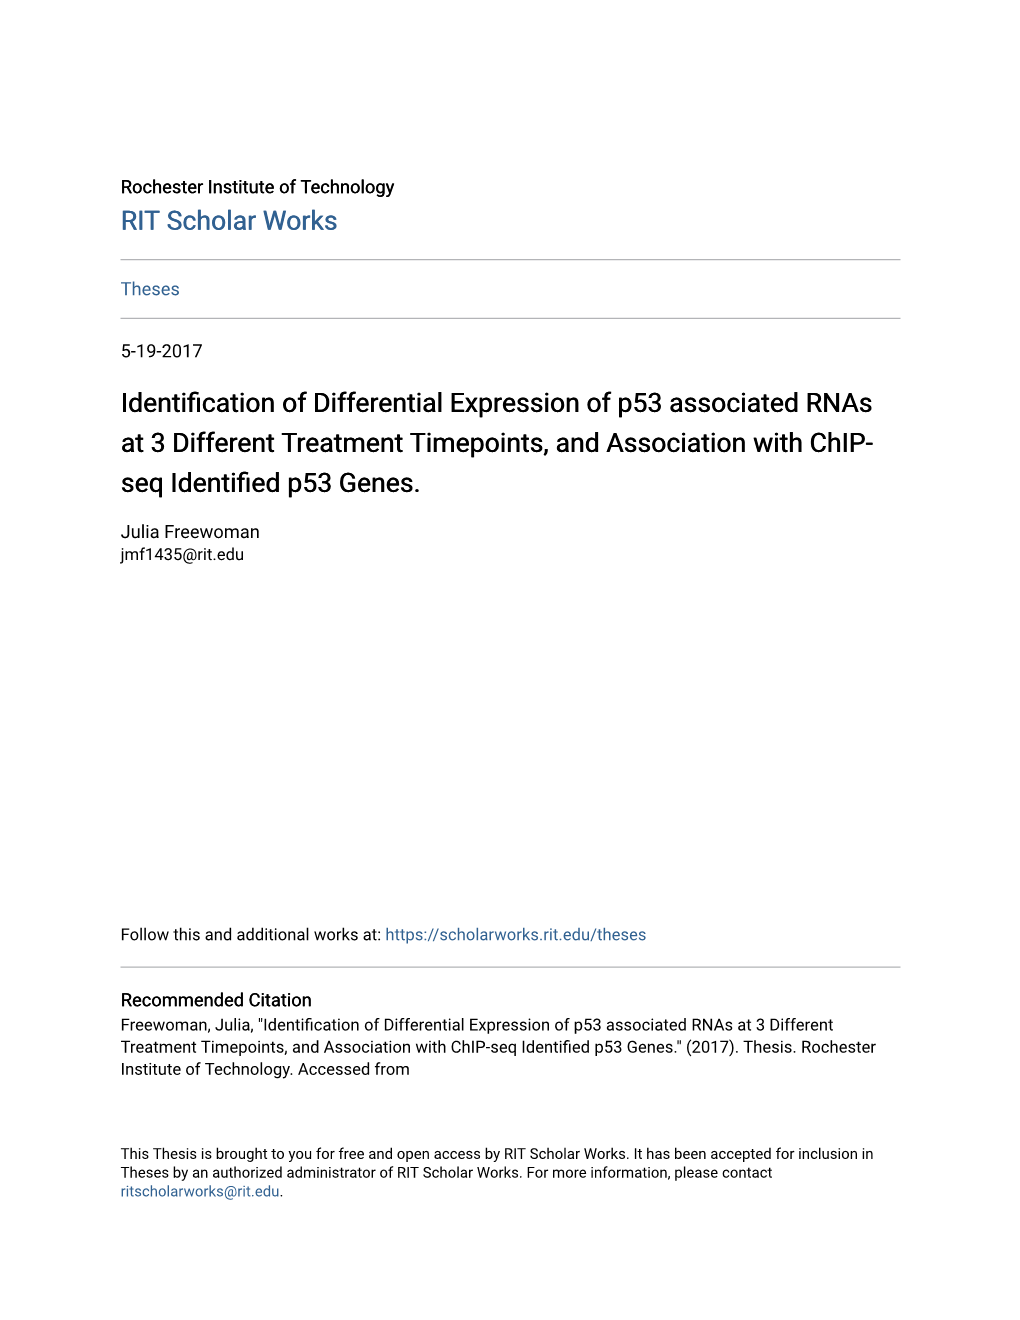 Identification of Differential Expression of P53 Associated Rnas at 3 Different Treatment Timepoints, and Association with Chip- Seq Identified P53 Genes